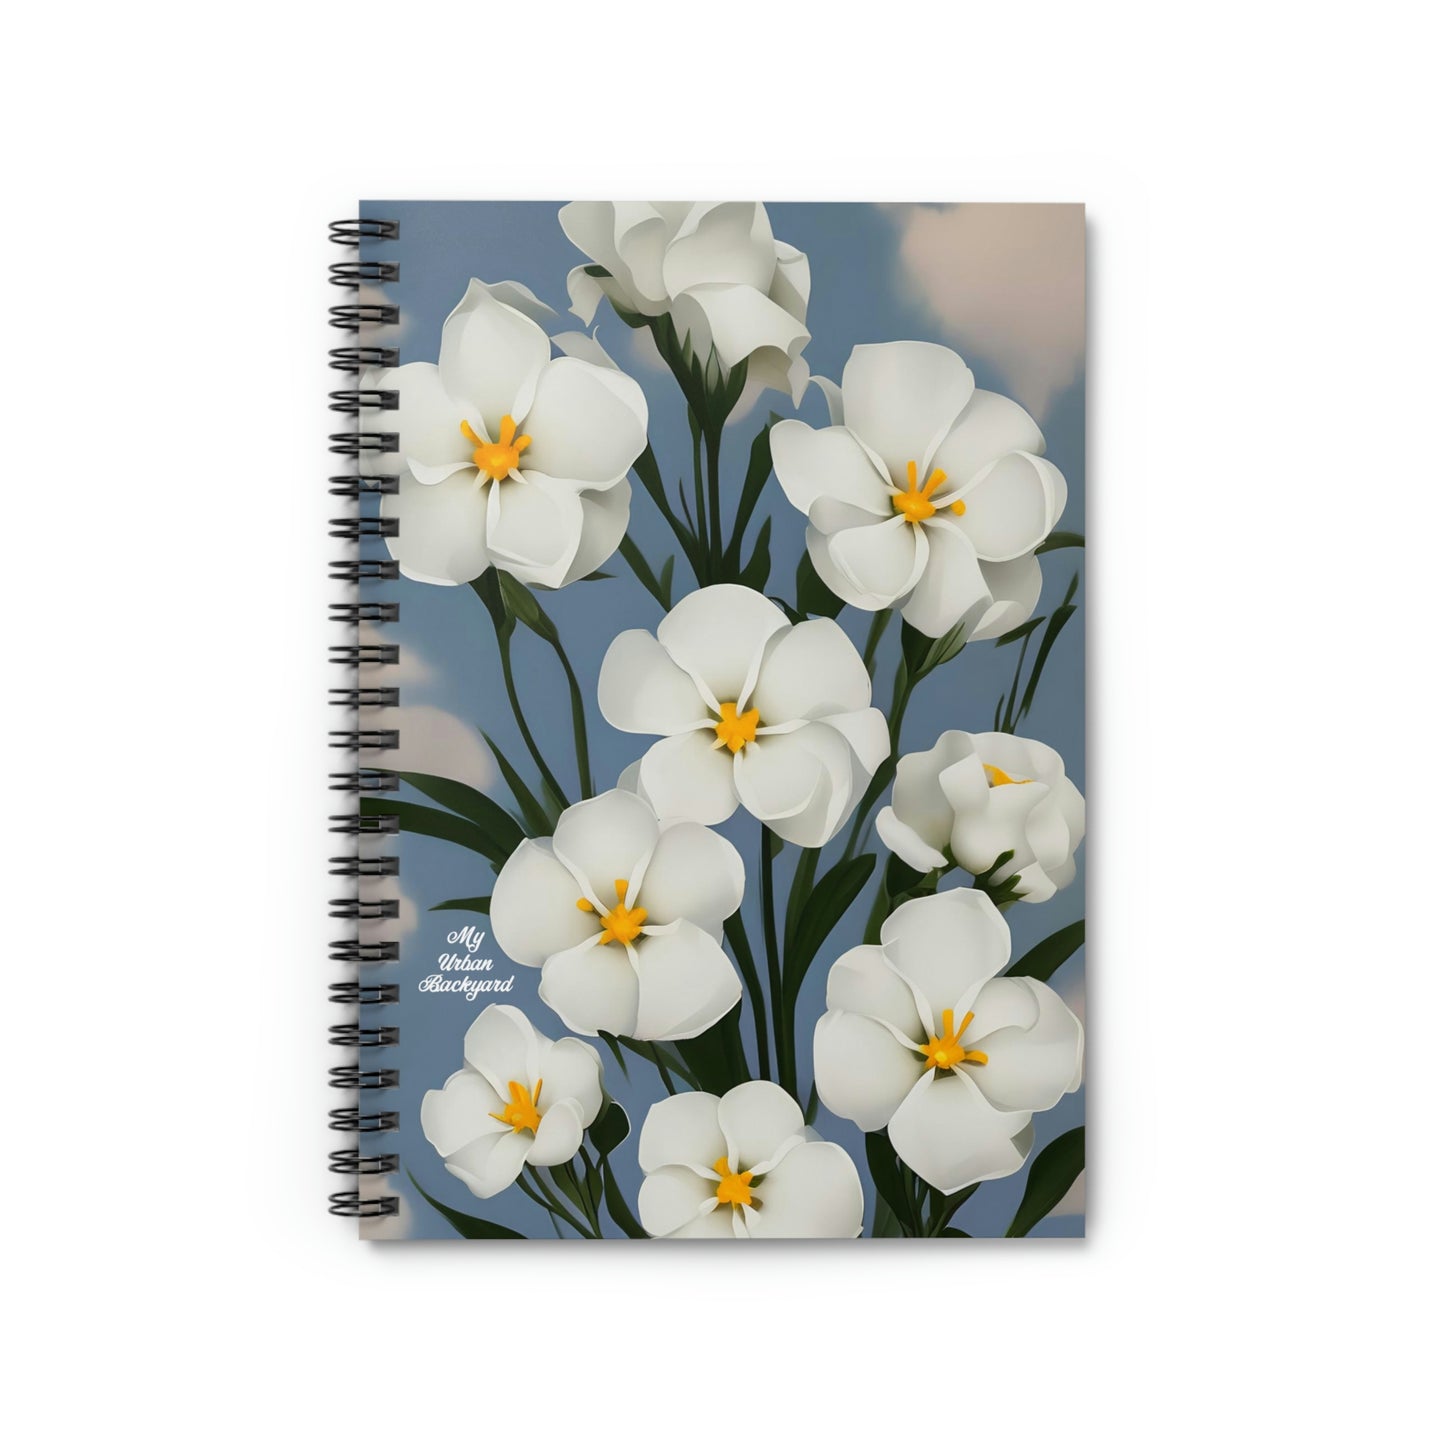 Spiral Notebook Writing Journal with 118 ruled line pages - White Flowers